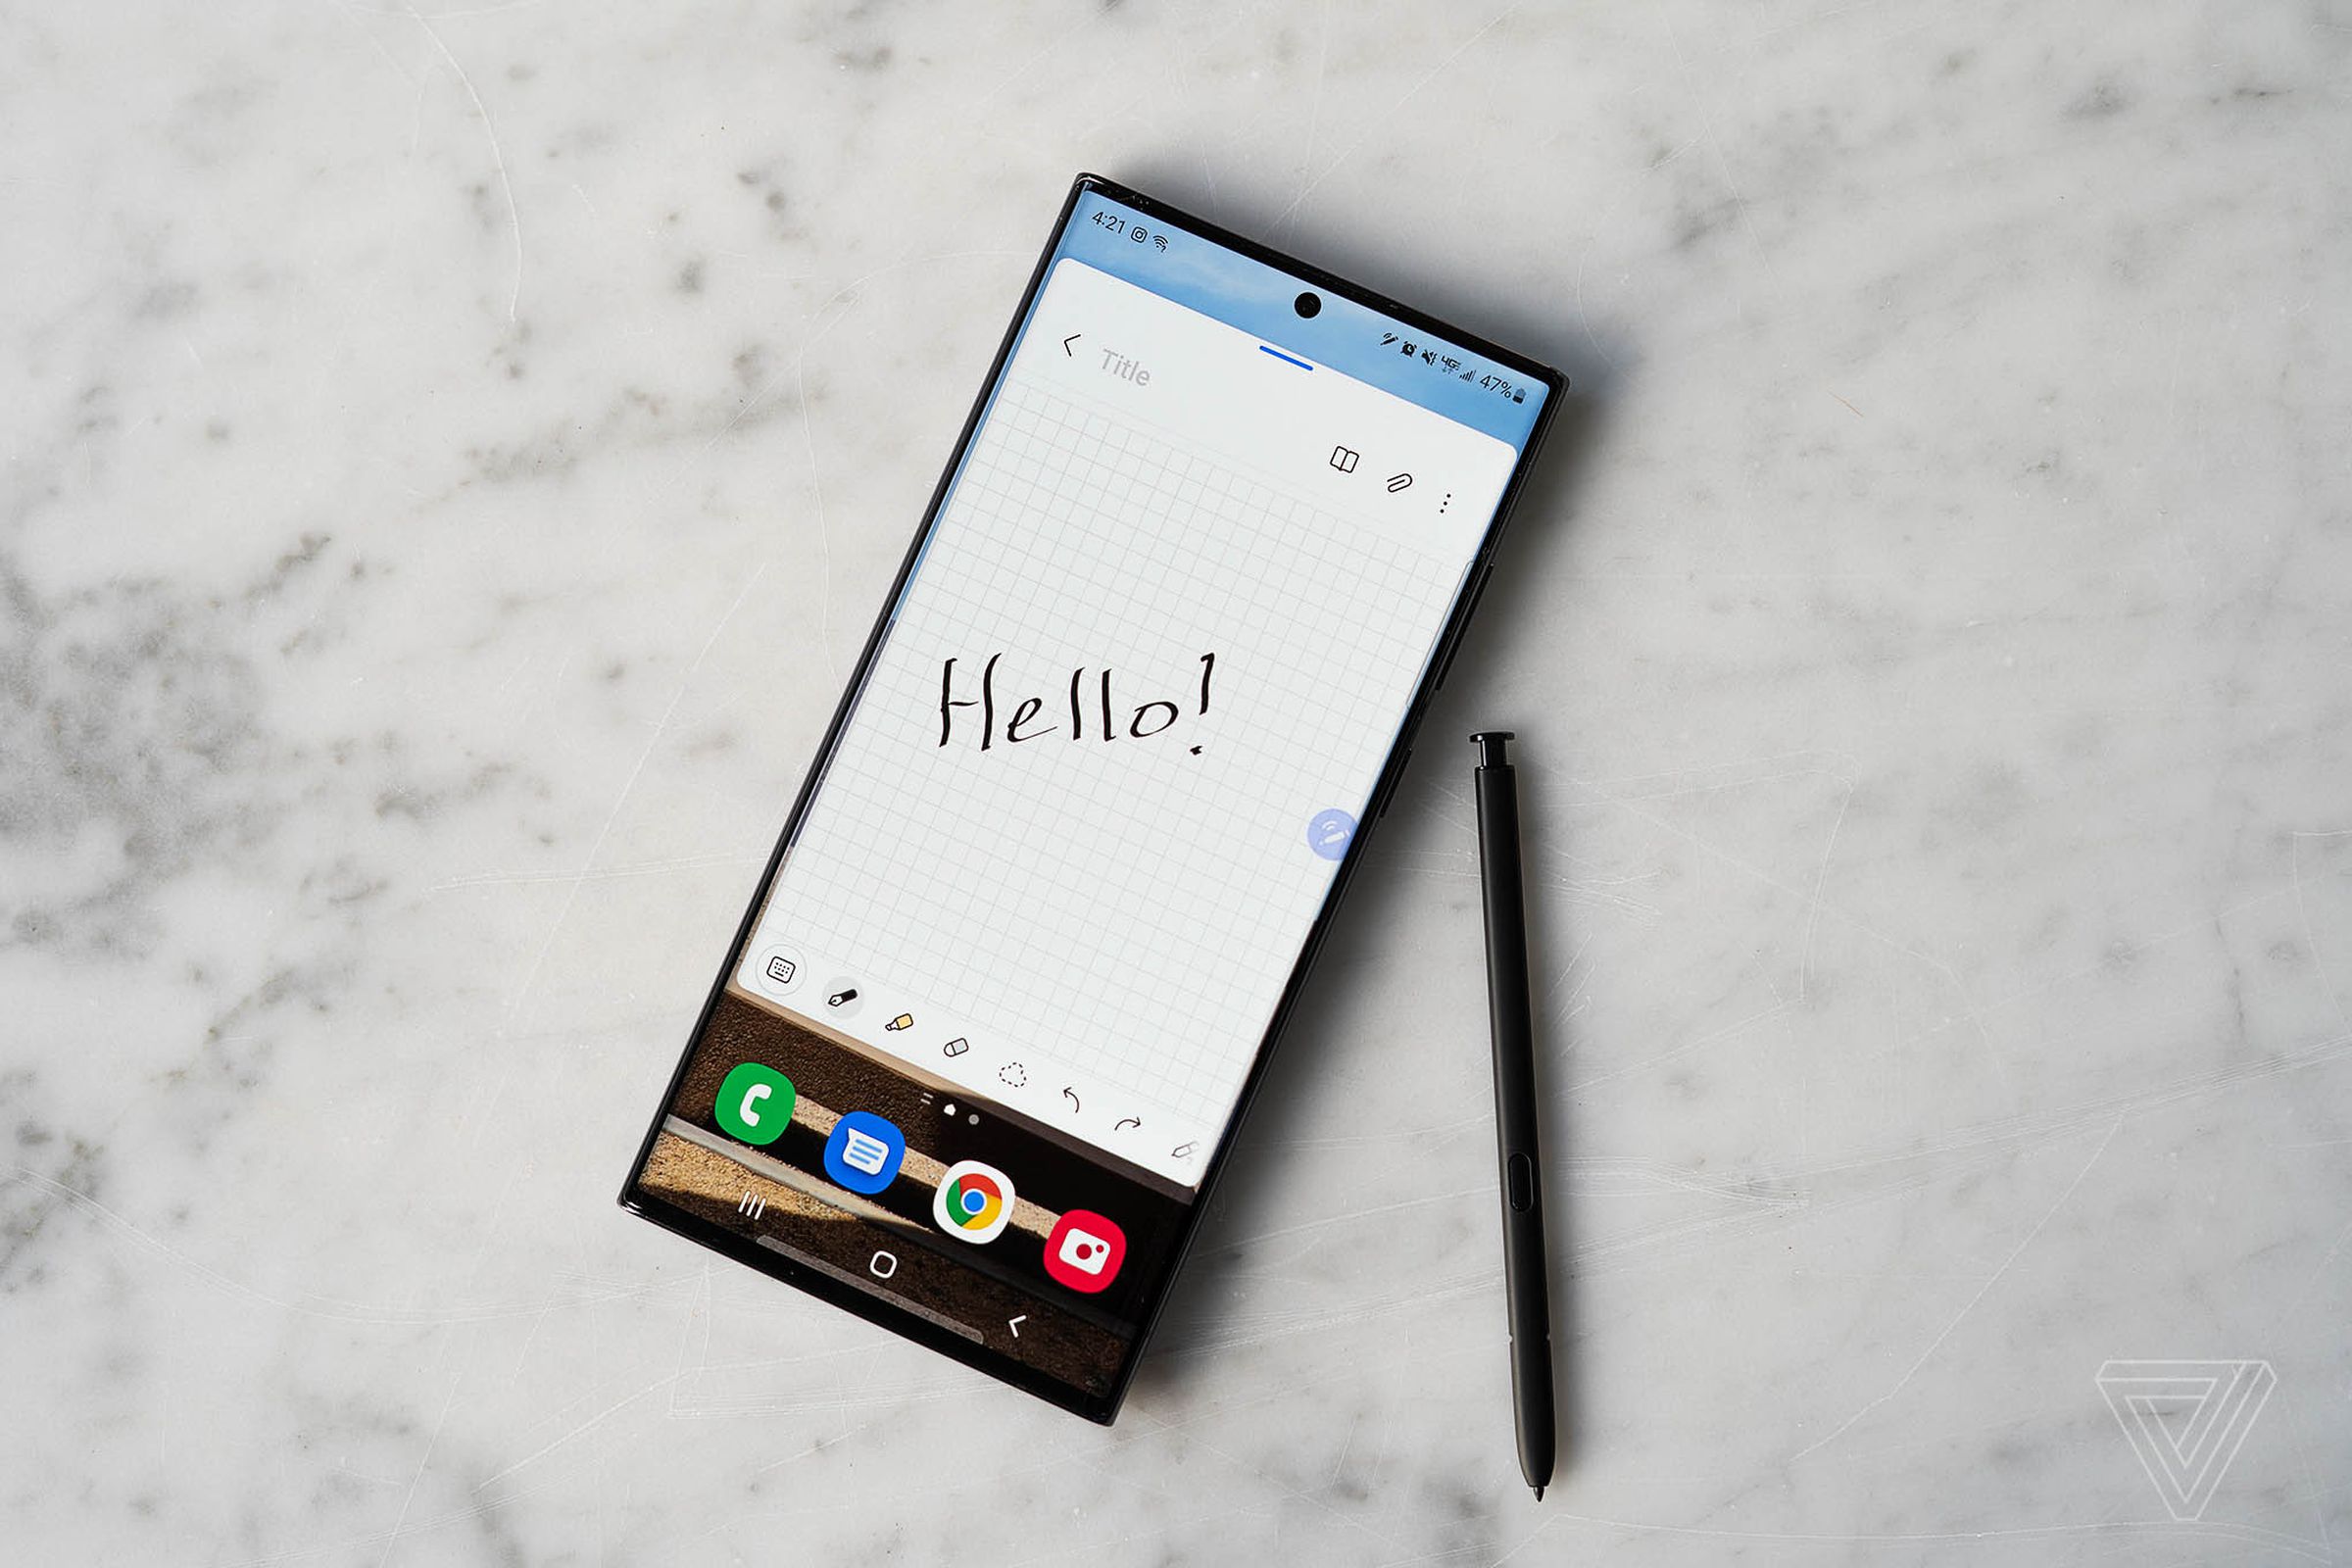 The S Pen comes with a powerful set of stylus features that can be overwhelming to a newcomer.